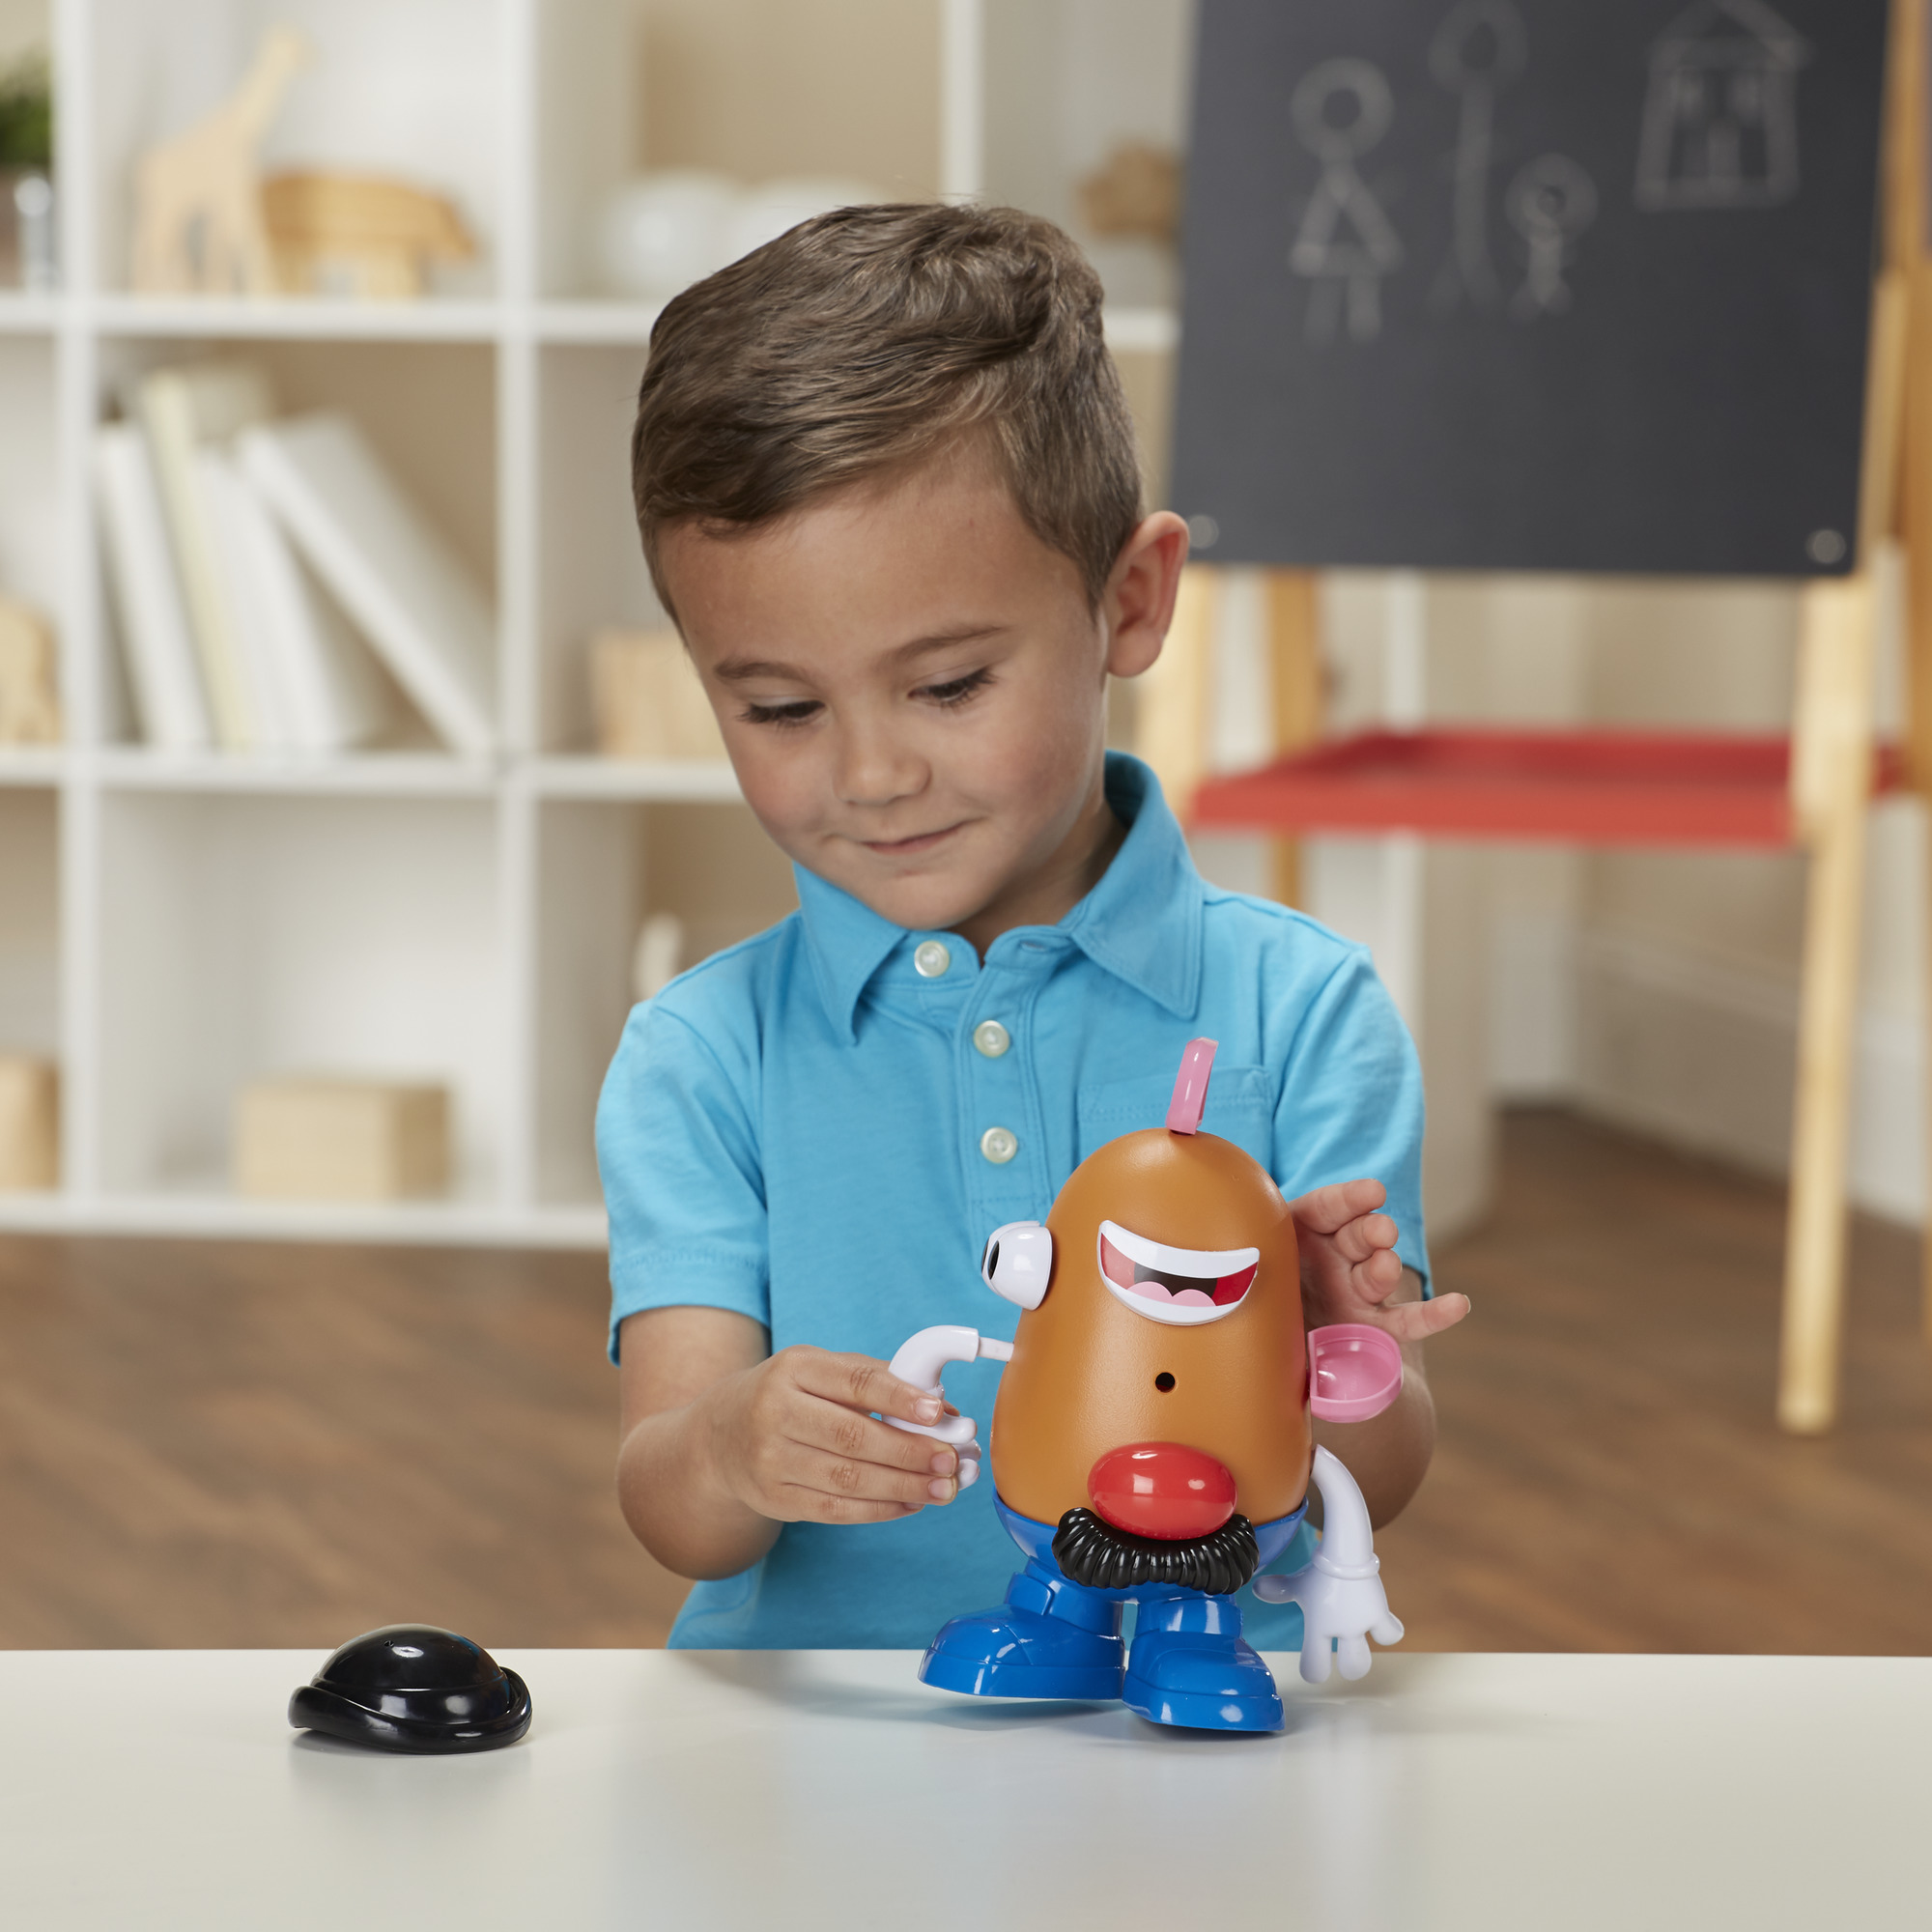 Mr. Potato Head: Playskool Friends Potato Head Kids Toy Action Figure for Boys and Girls Ages 2 3 4 5 6 7 and Up (5.5”) - image 5 of 8